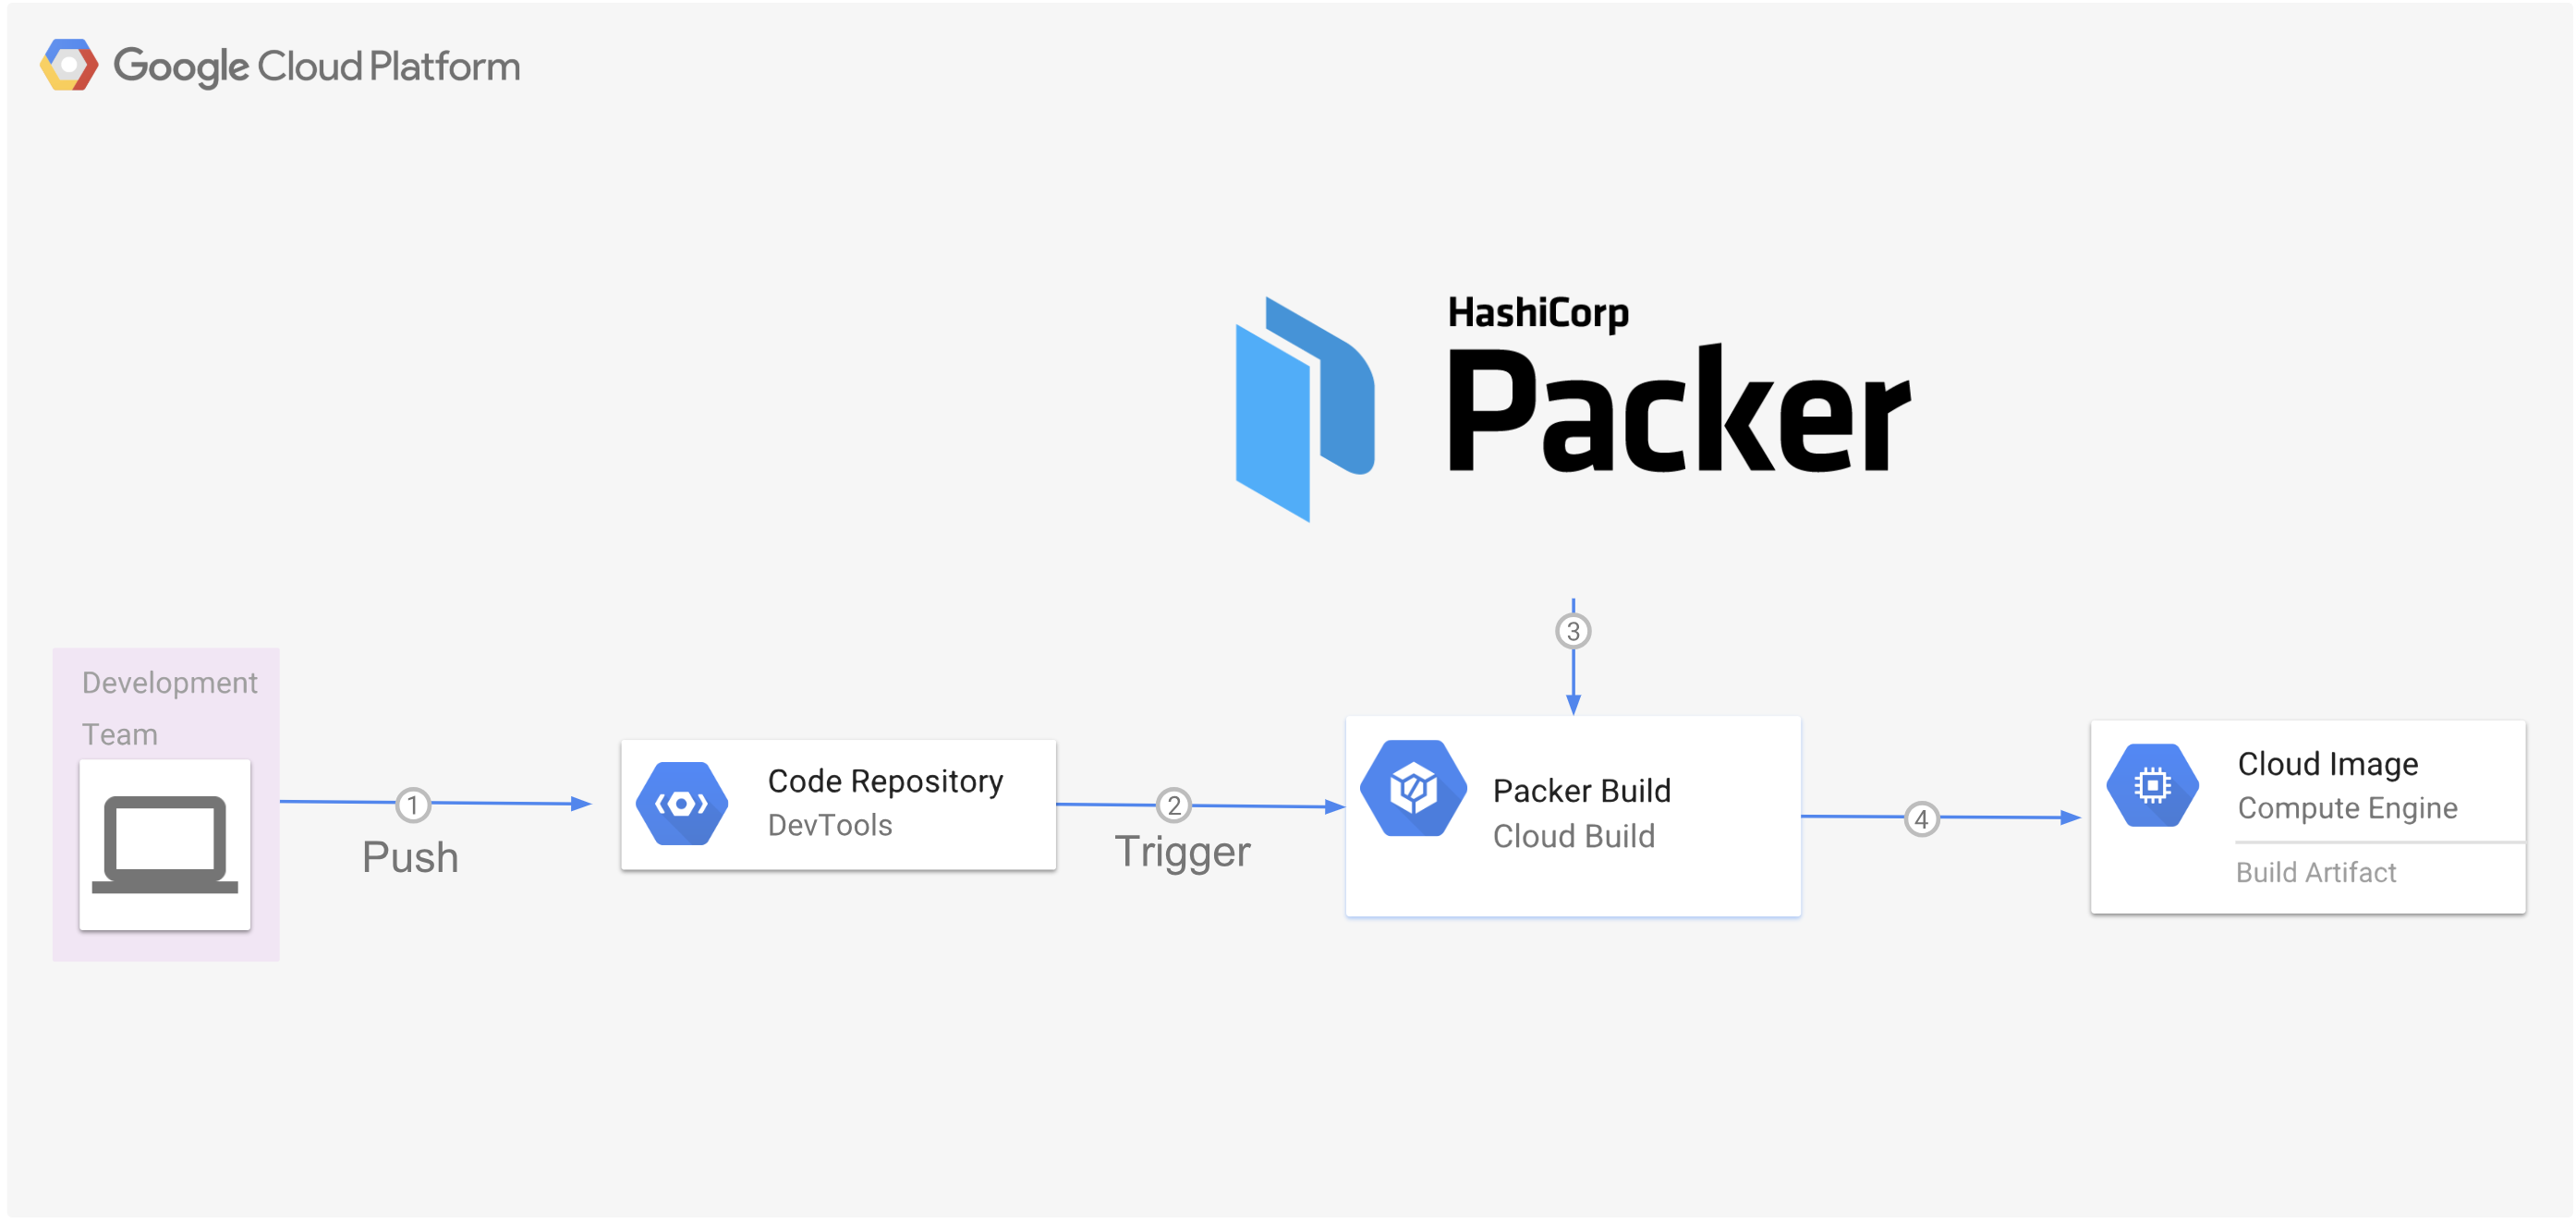  push to repository triggers cloud build with packer which builds machine image